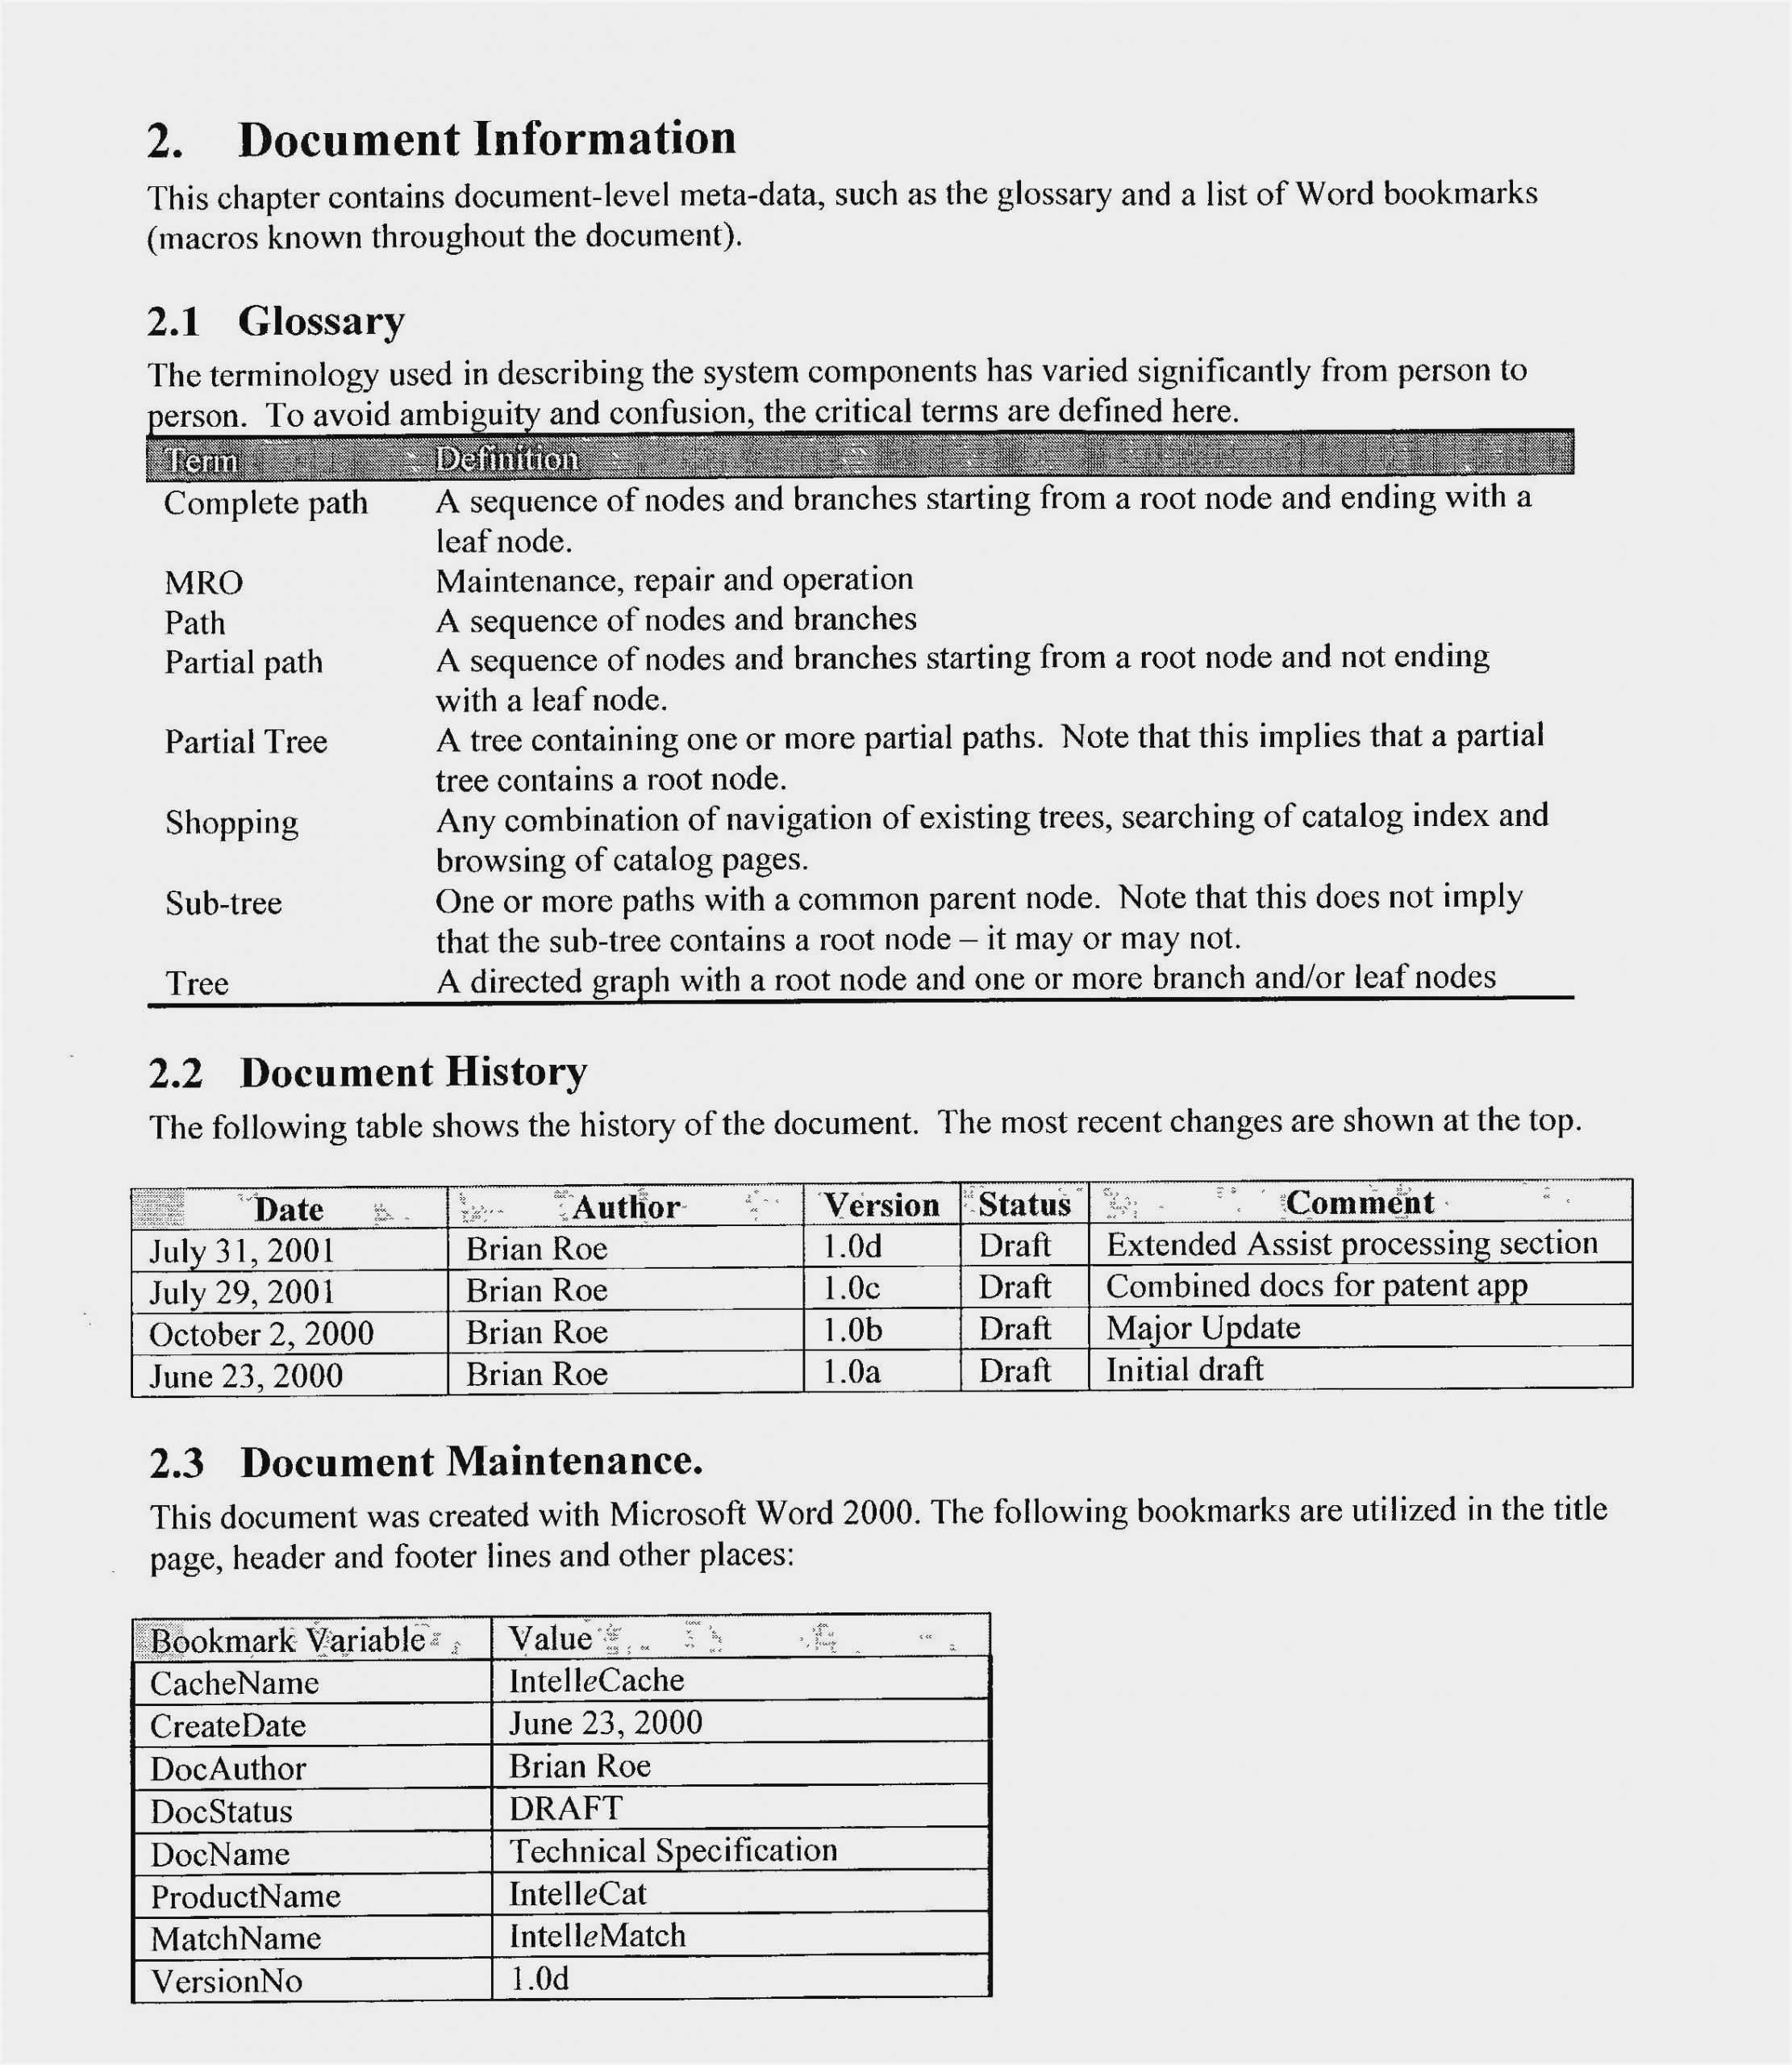 Free Sales Resume Templates Microsoft Word - Resume : Resume Inside Hours Of Operation Template Microsoft Word